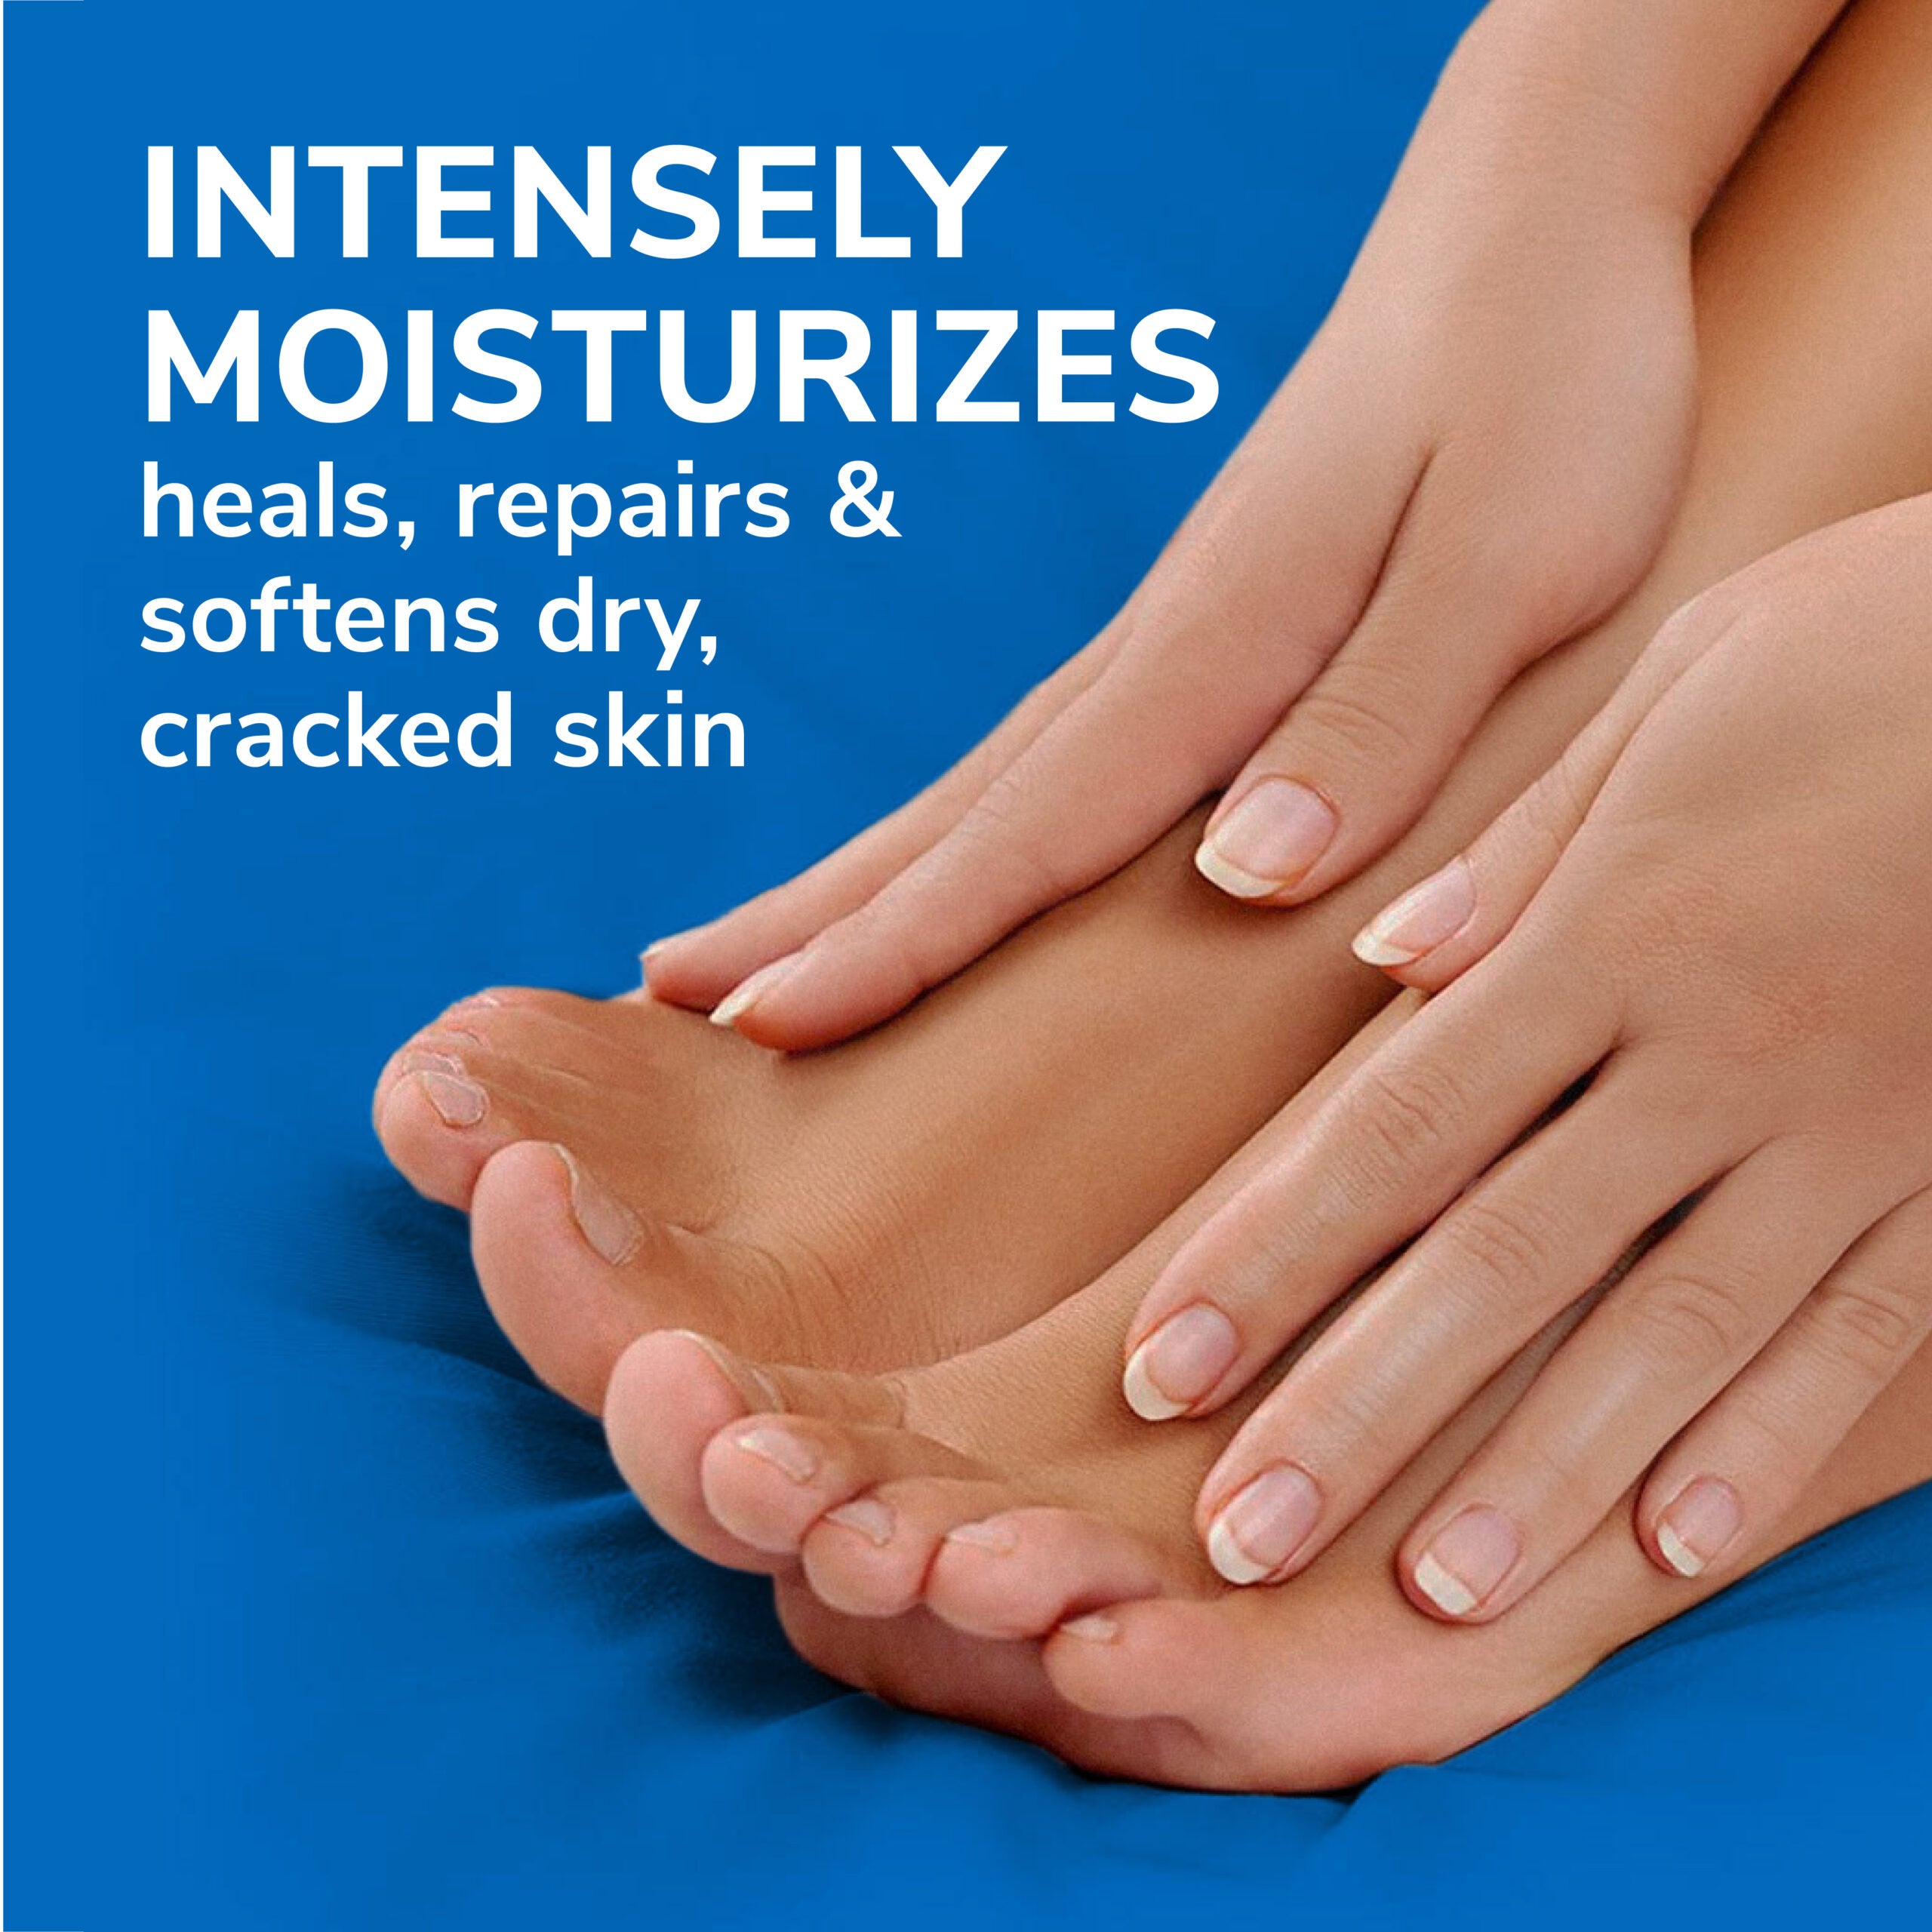 At-Home Remedies To Heal Cracked Heels - Aboite Podiatry Associates, P.C.